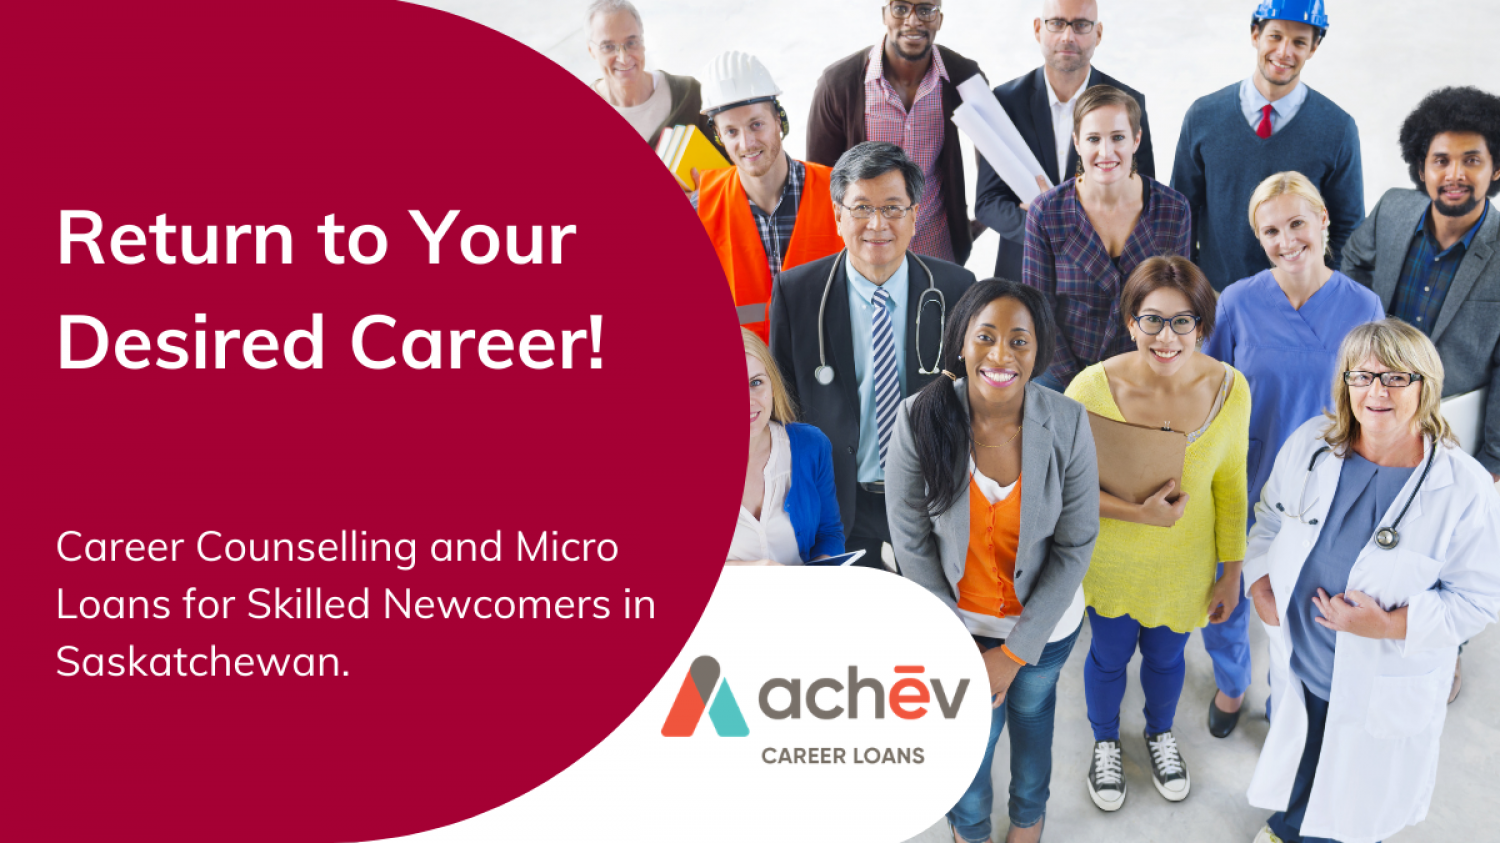 Free Online Career Counselling Services for Internationally Trained Newcomers in Saskatchewan!